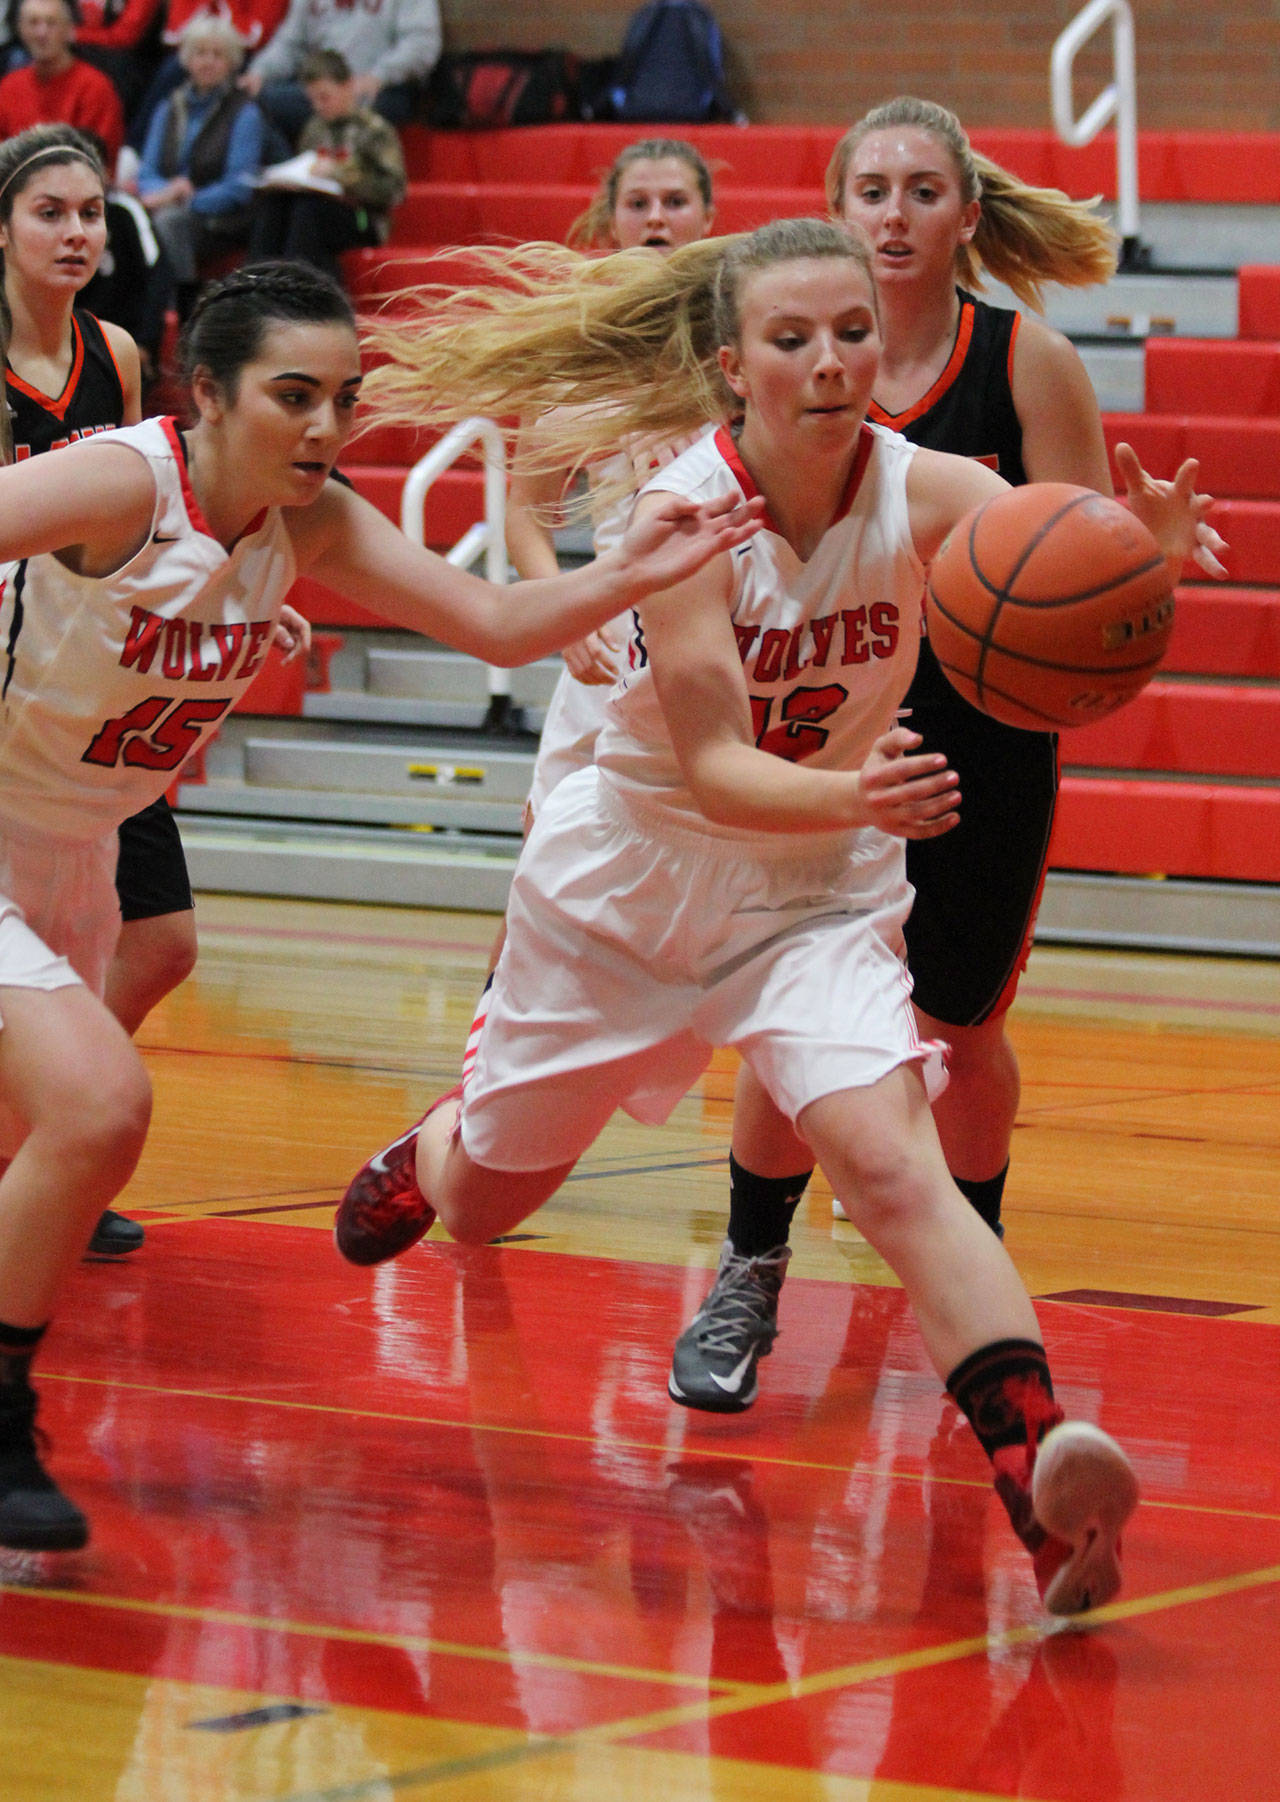 Allison Wenzel (12) chases down a loose ball ahead of teammate Kalia Littlejohn.(Photo by Jim Waller/Whidbey News-Times)